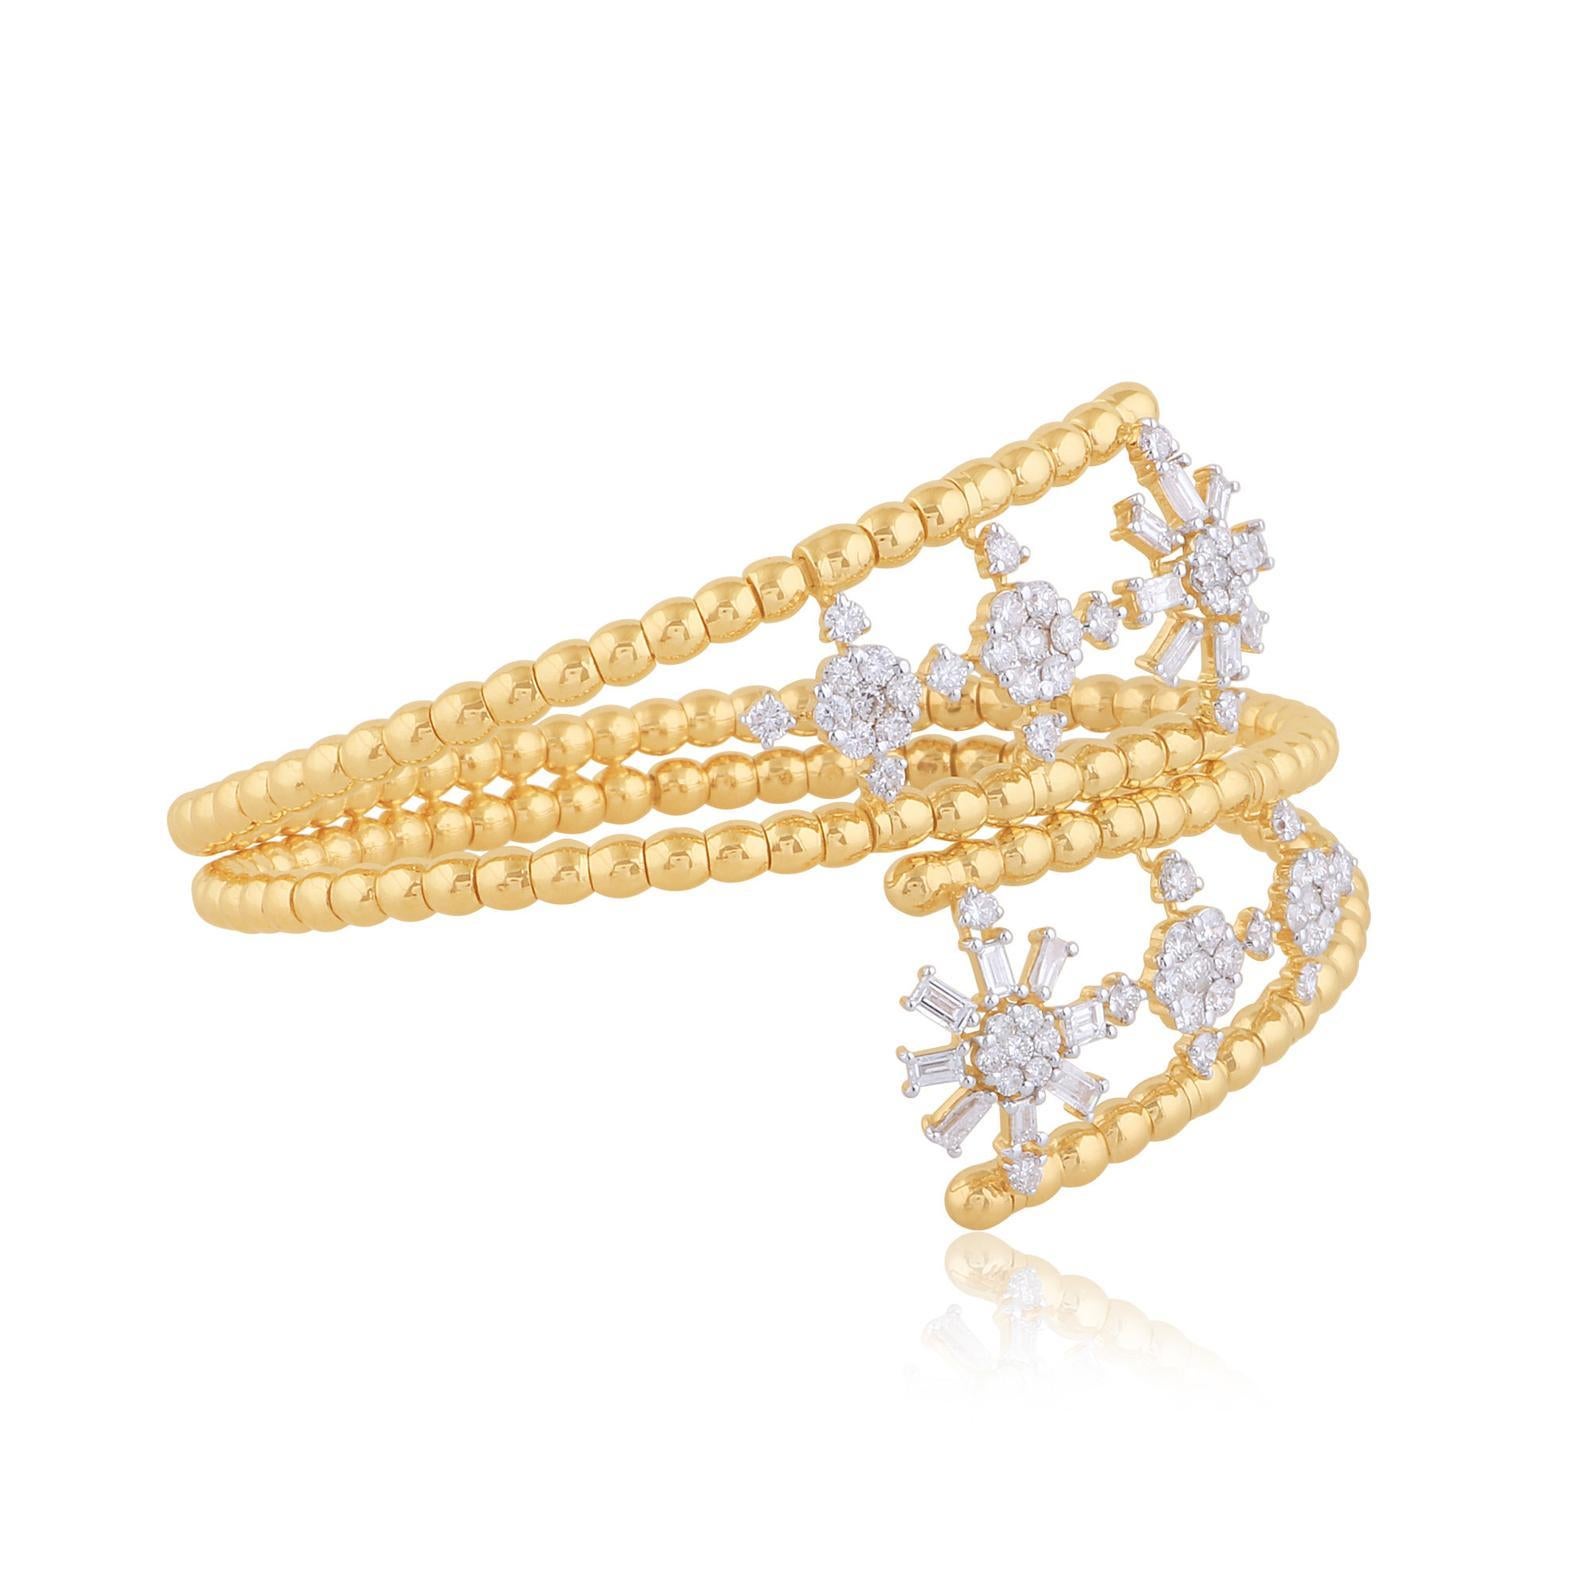 A beautiful bracelet handmade in 14 Karat Yellow Gold and set in 3.20 carats of glimmering diamonds. Available in rose and yellow gold.

FOLLOW MEGHNA JEWELS storefront to view the latest collection & exclusive pieces. Meghna Jewels is proudly rated